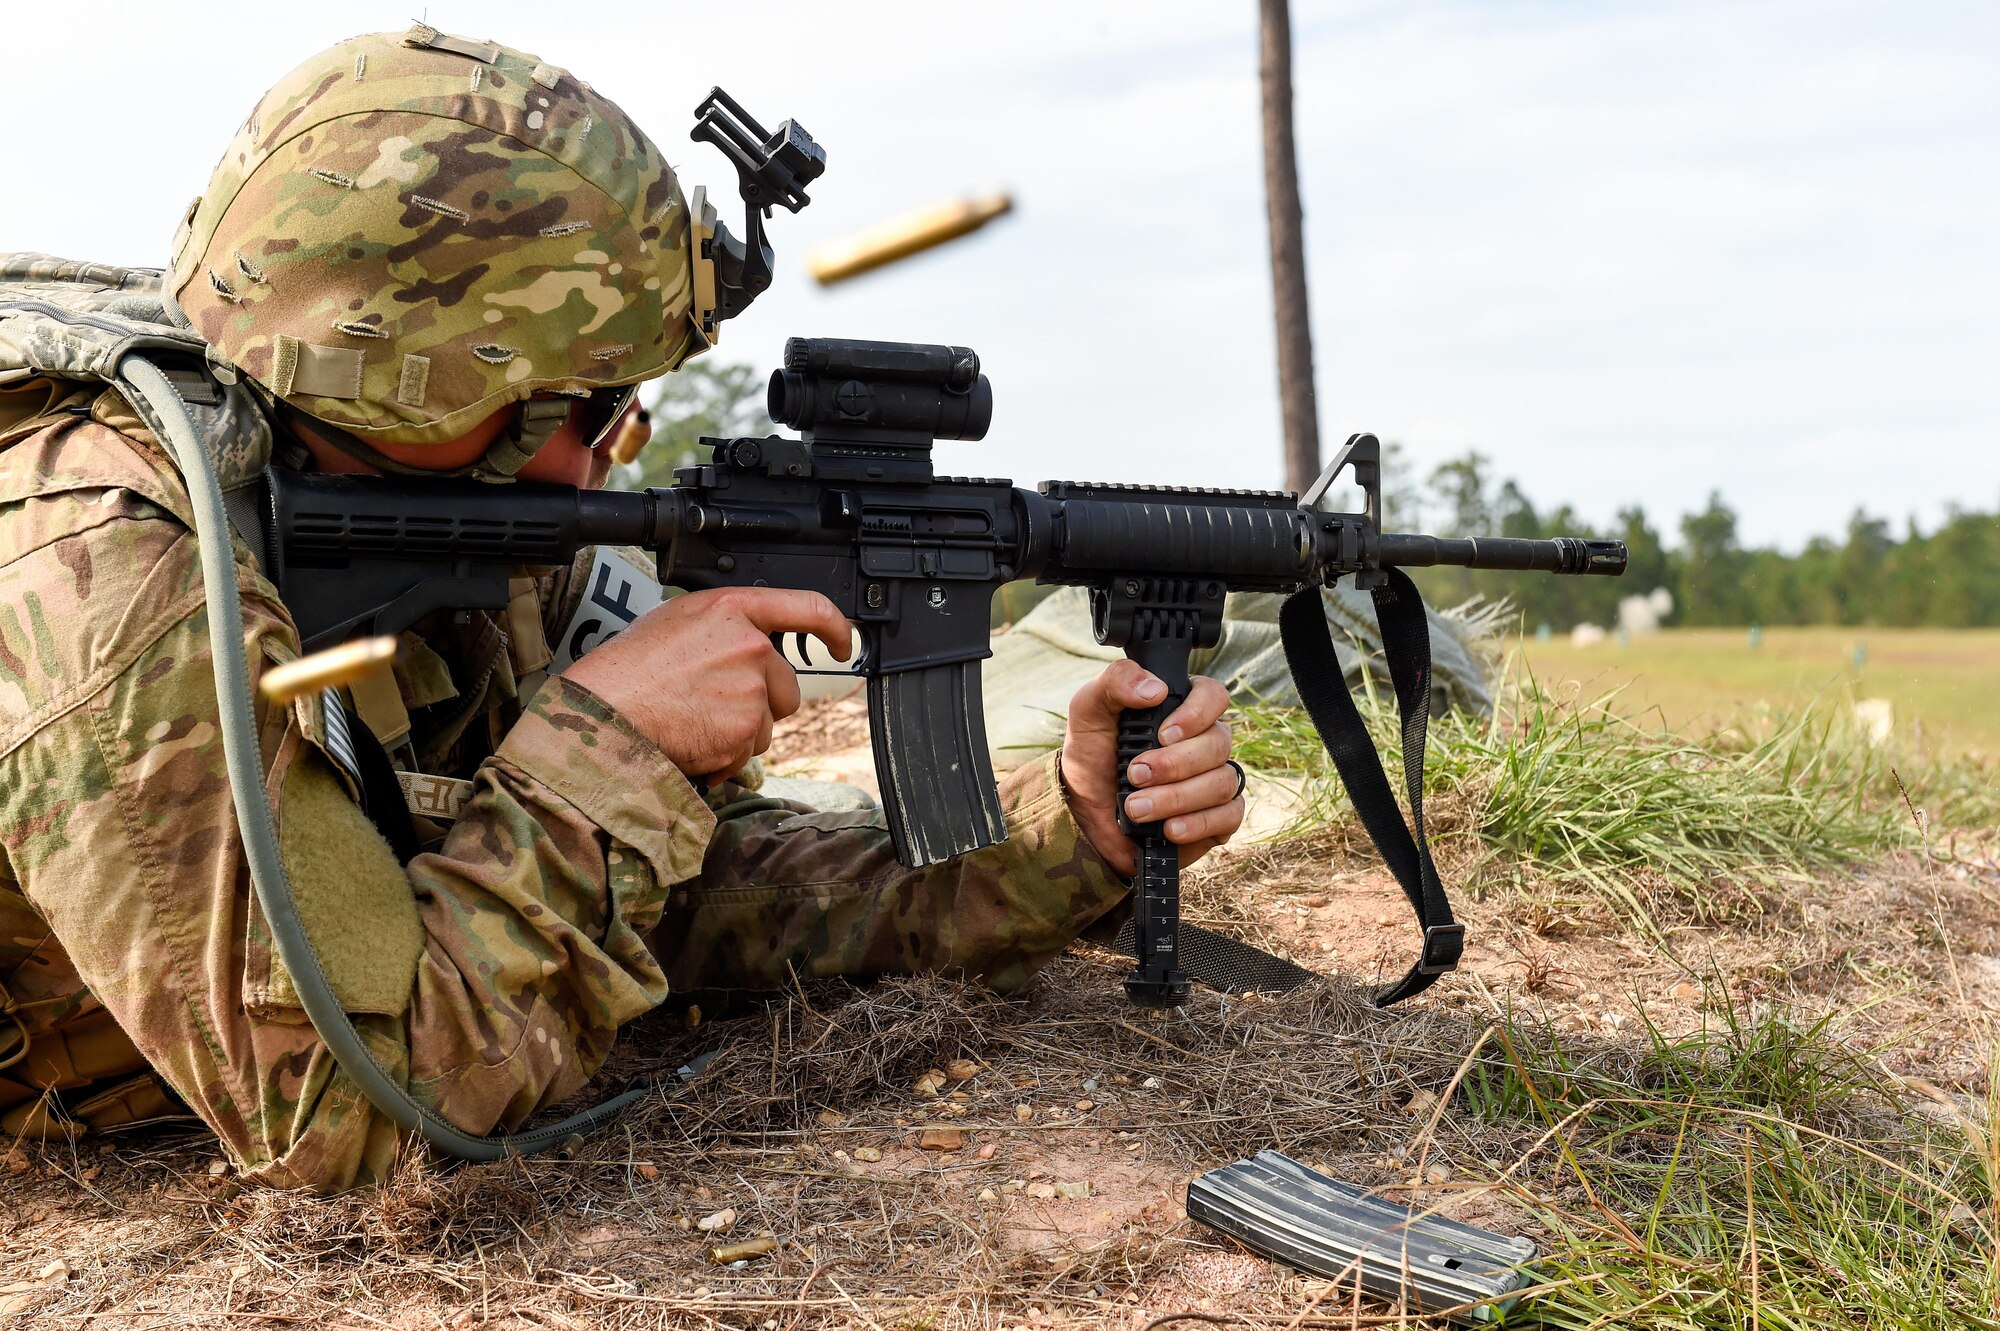 Senior Airman Parker White, a combat arms training and maintenance instructor with the 1st Special Operation Security Forces Squadron, fires his weapon during Task Force Exercise Southern Strike at Camp Shelby, Miss., Oct. 24, 2016. Air Commandos received in-depth weapons training from combat arms training and maintenance instructors with the 1st Special Operations Security Forces Squadron. (U.S. Air Force photo by Senior Airman Jeff Parkinson)